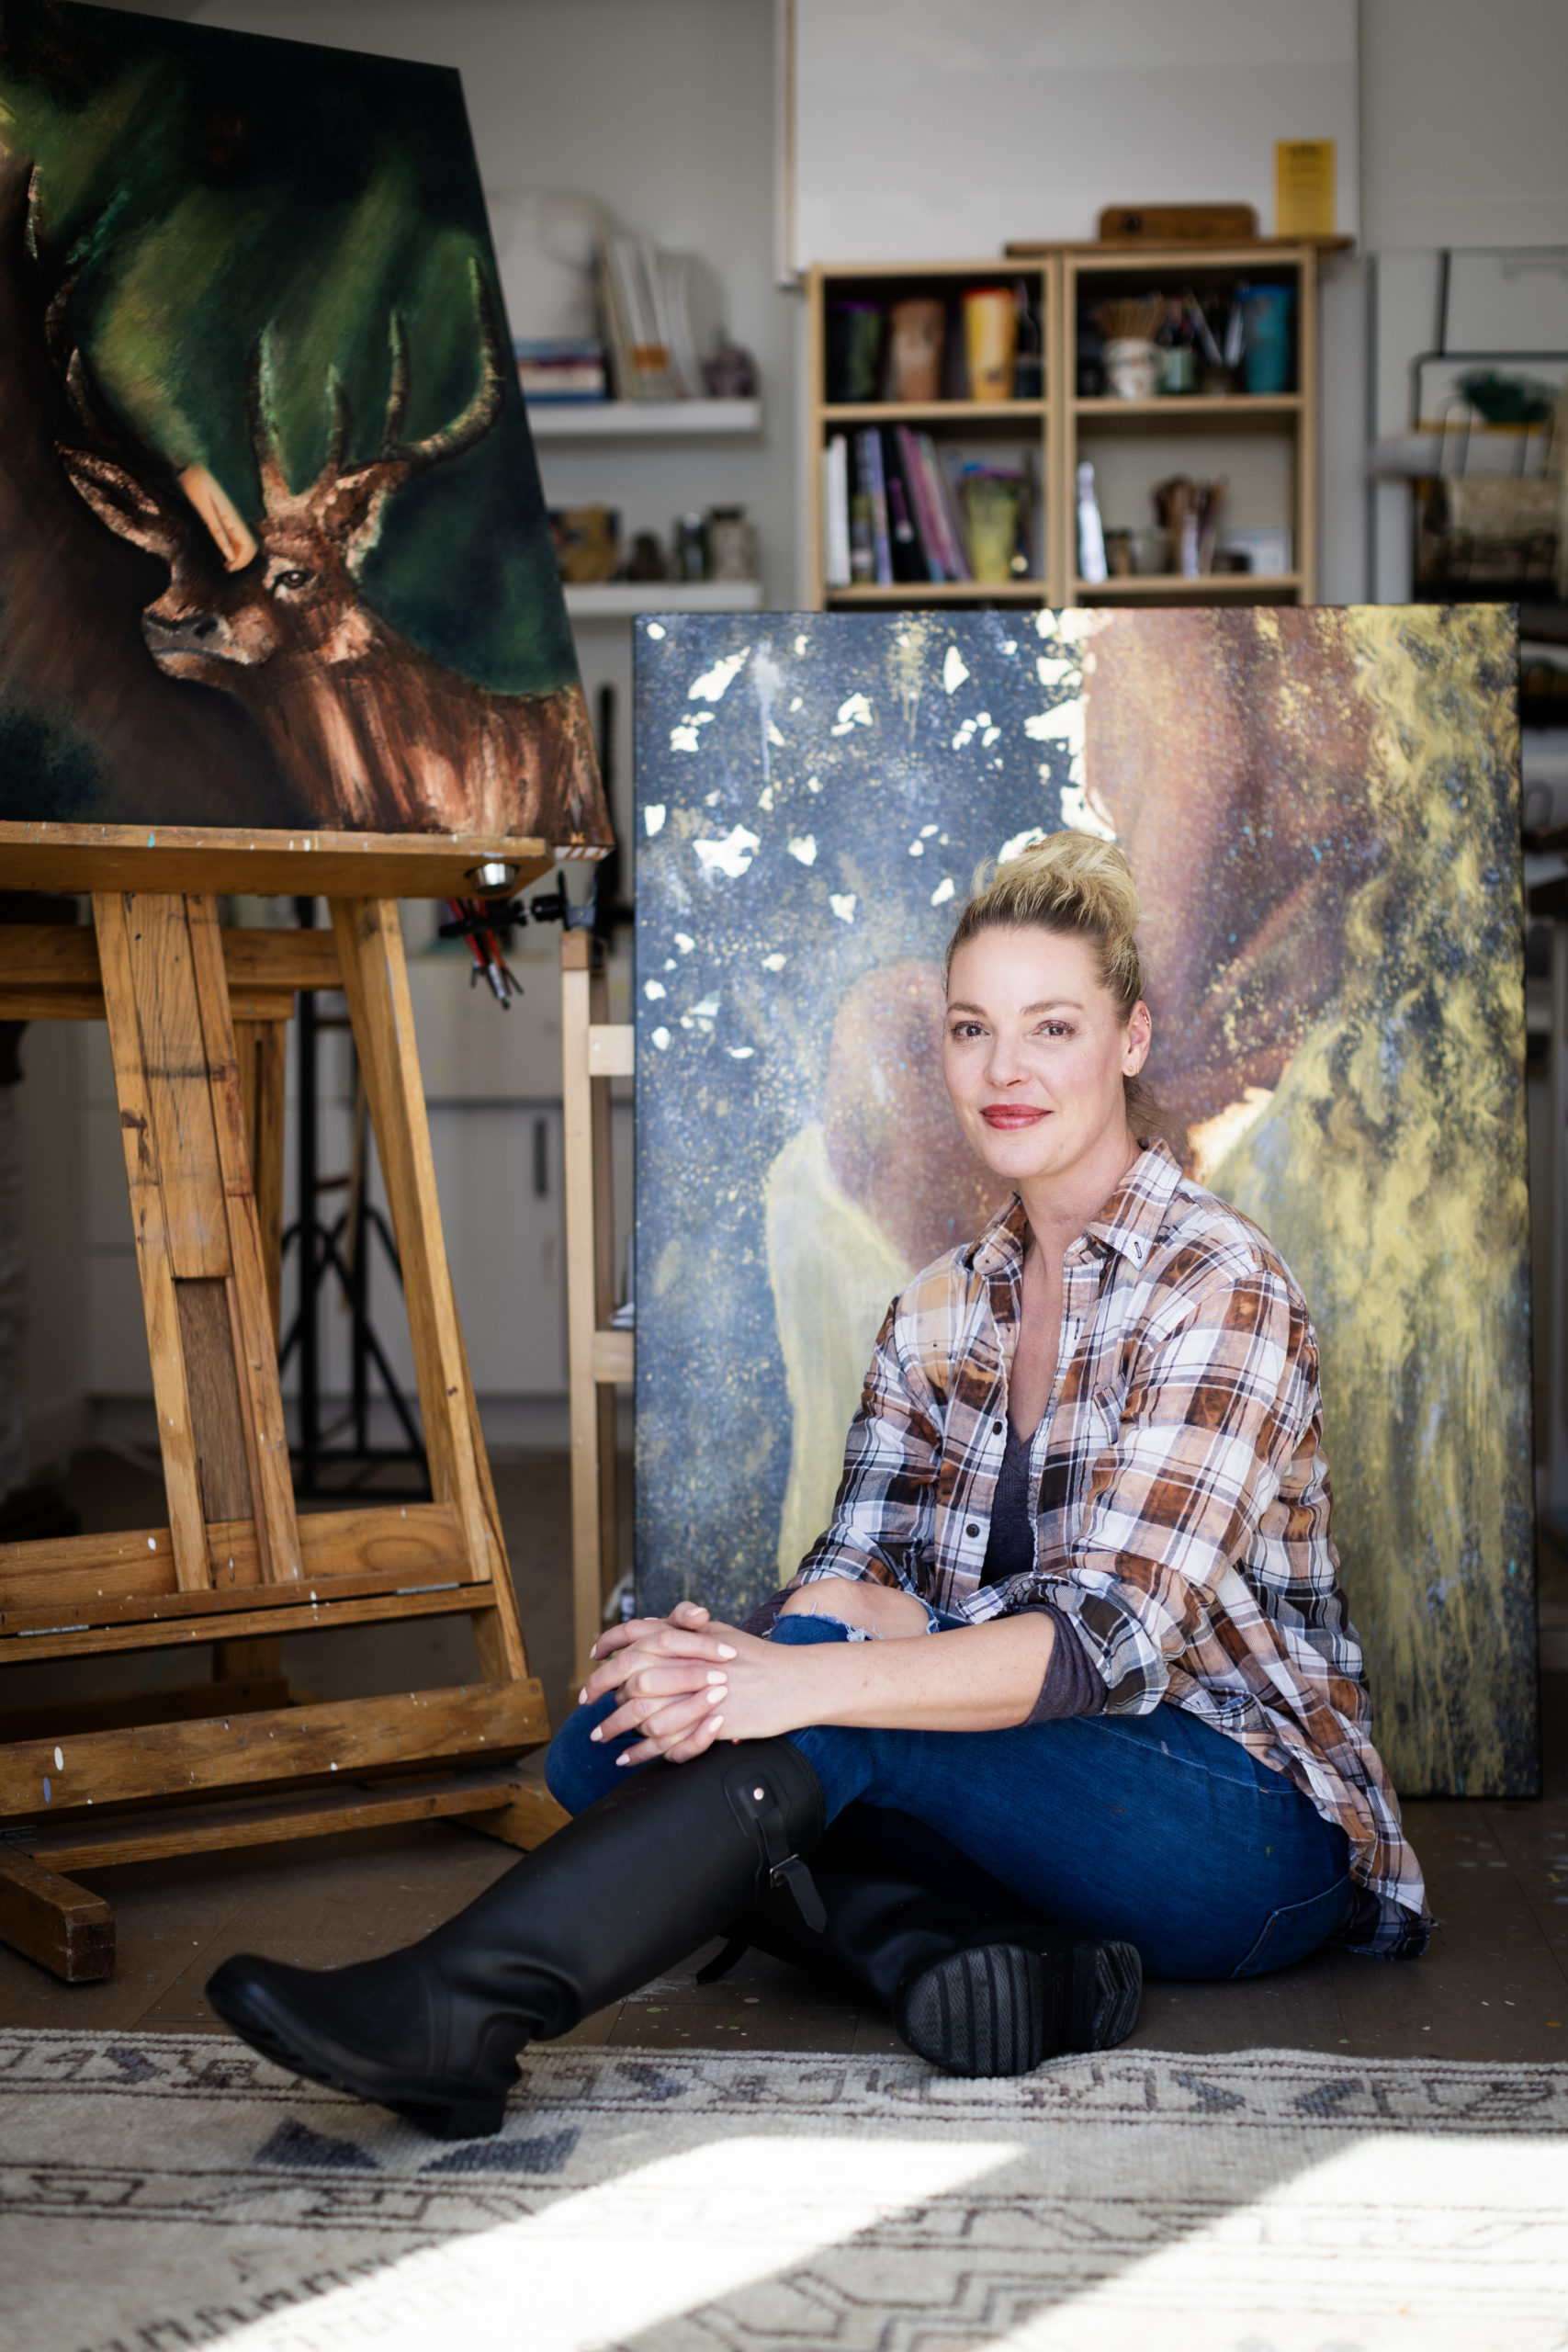 Gallery MAR Presents: Katherine Heigl’s “Mother Nature” Exhibition